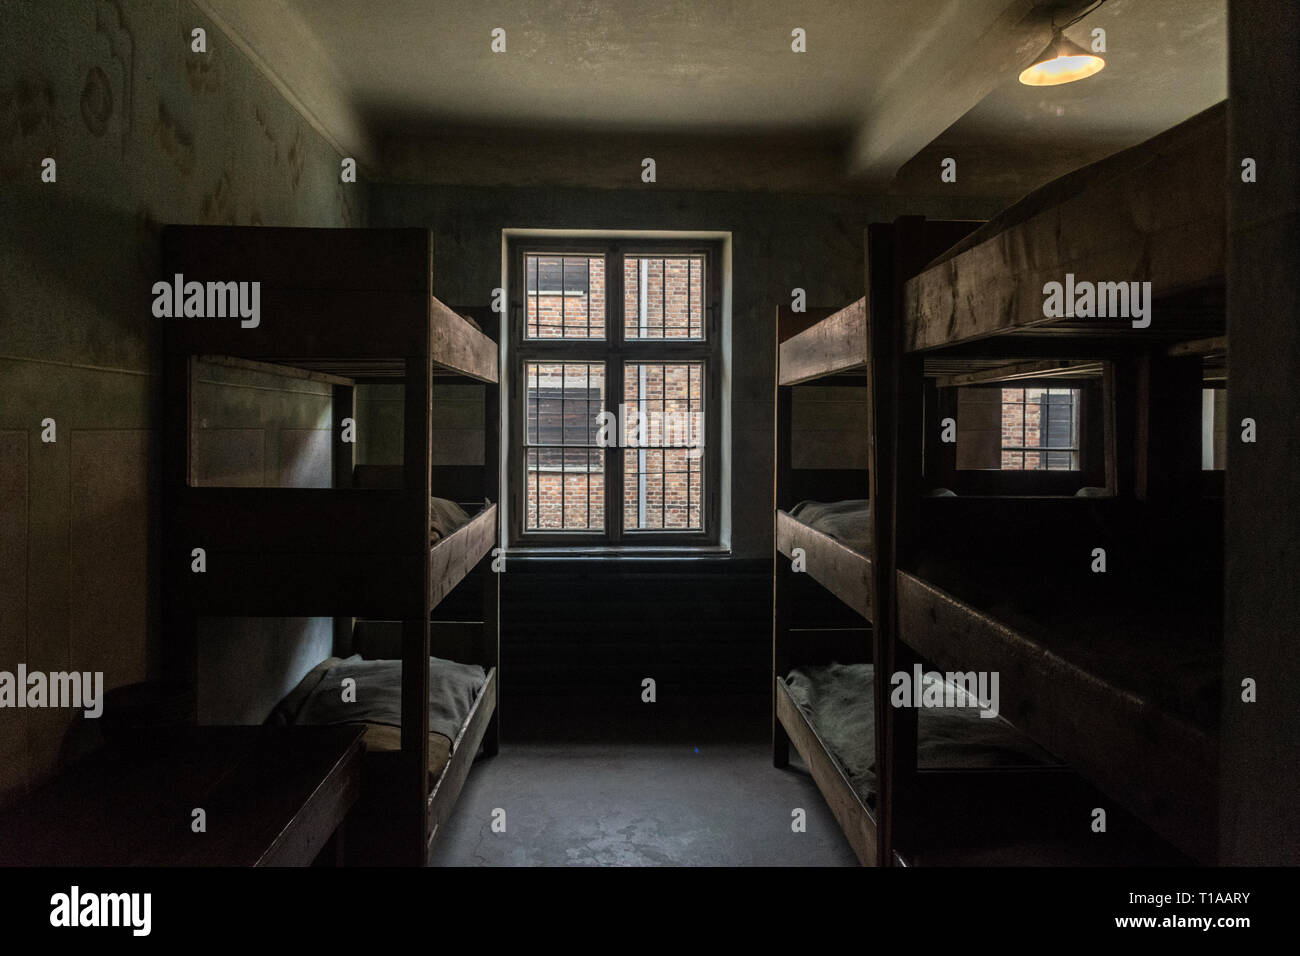 Oswiencim, Poland - September 21, 2019: Sleeping quarters with wooden bunk beds where the prisoners spend the days waiting for a trial at The Nazi Stock Photo